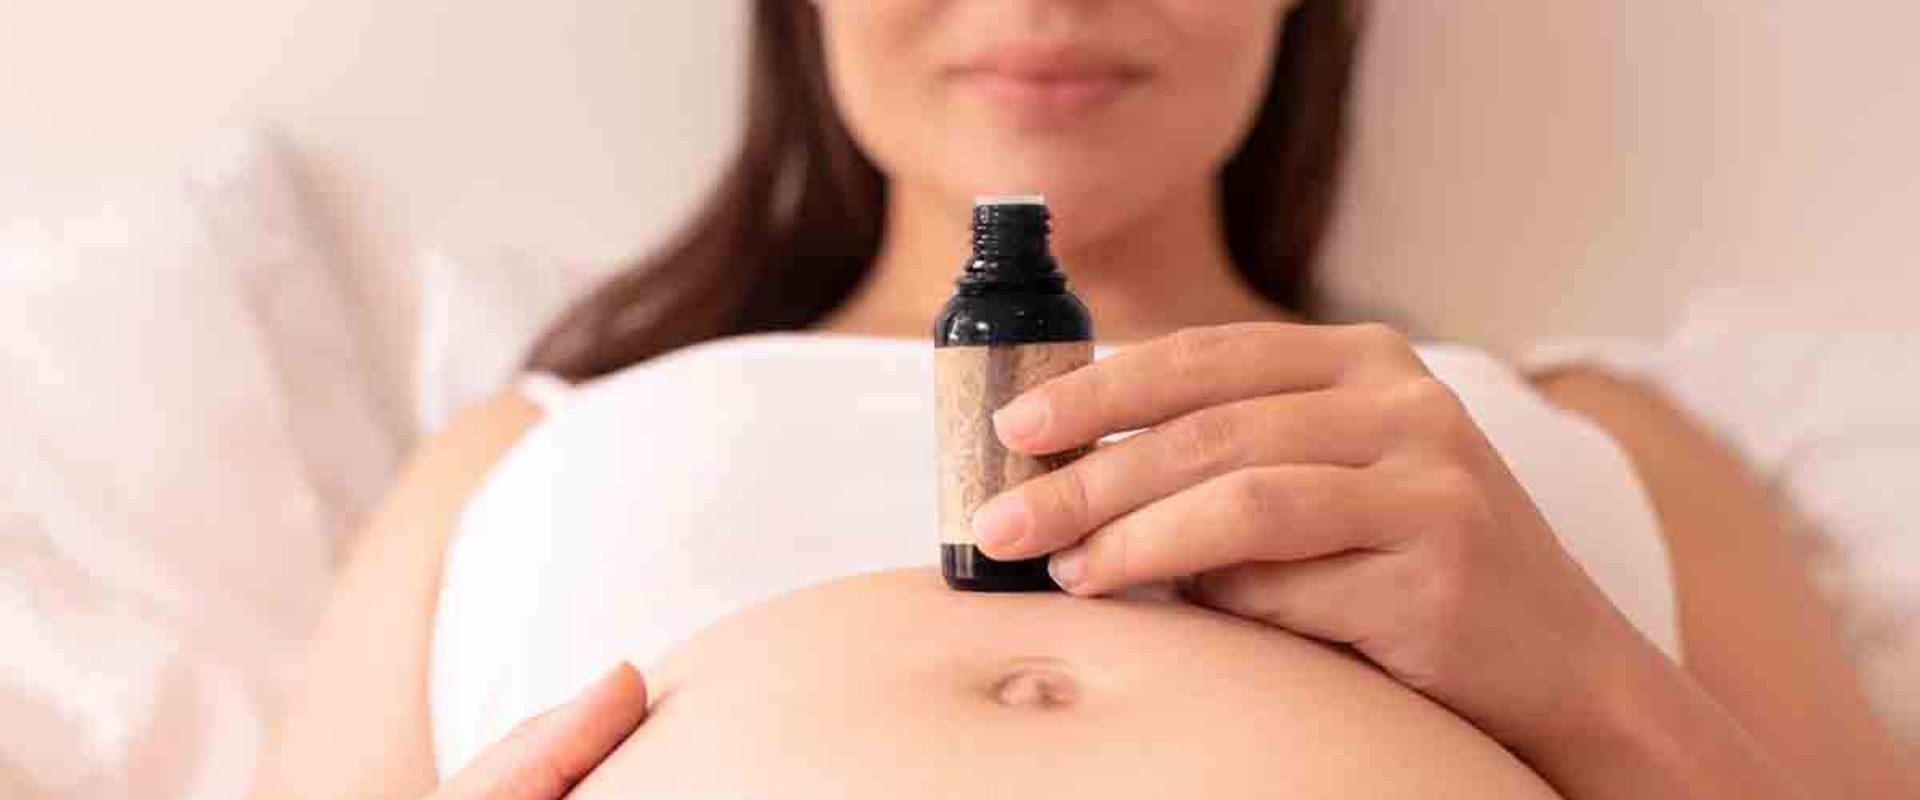 Is it Safe to Use CBD Oil While Pregnant or Breastfeeding?